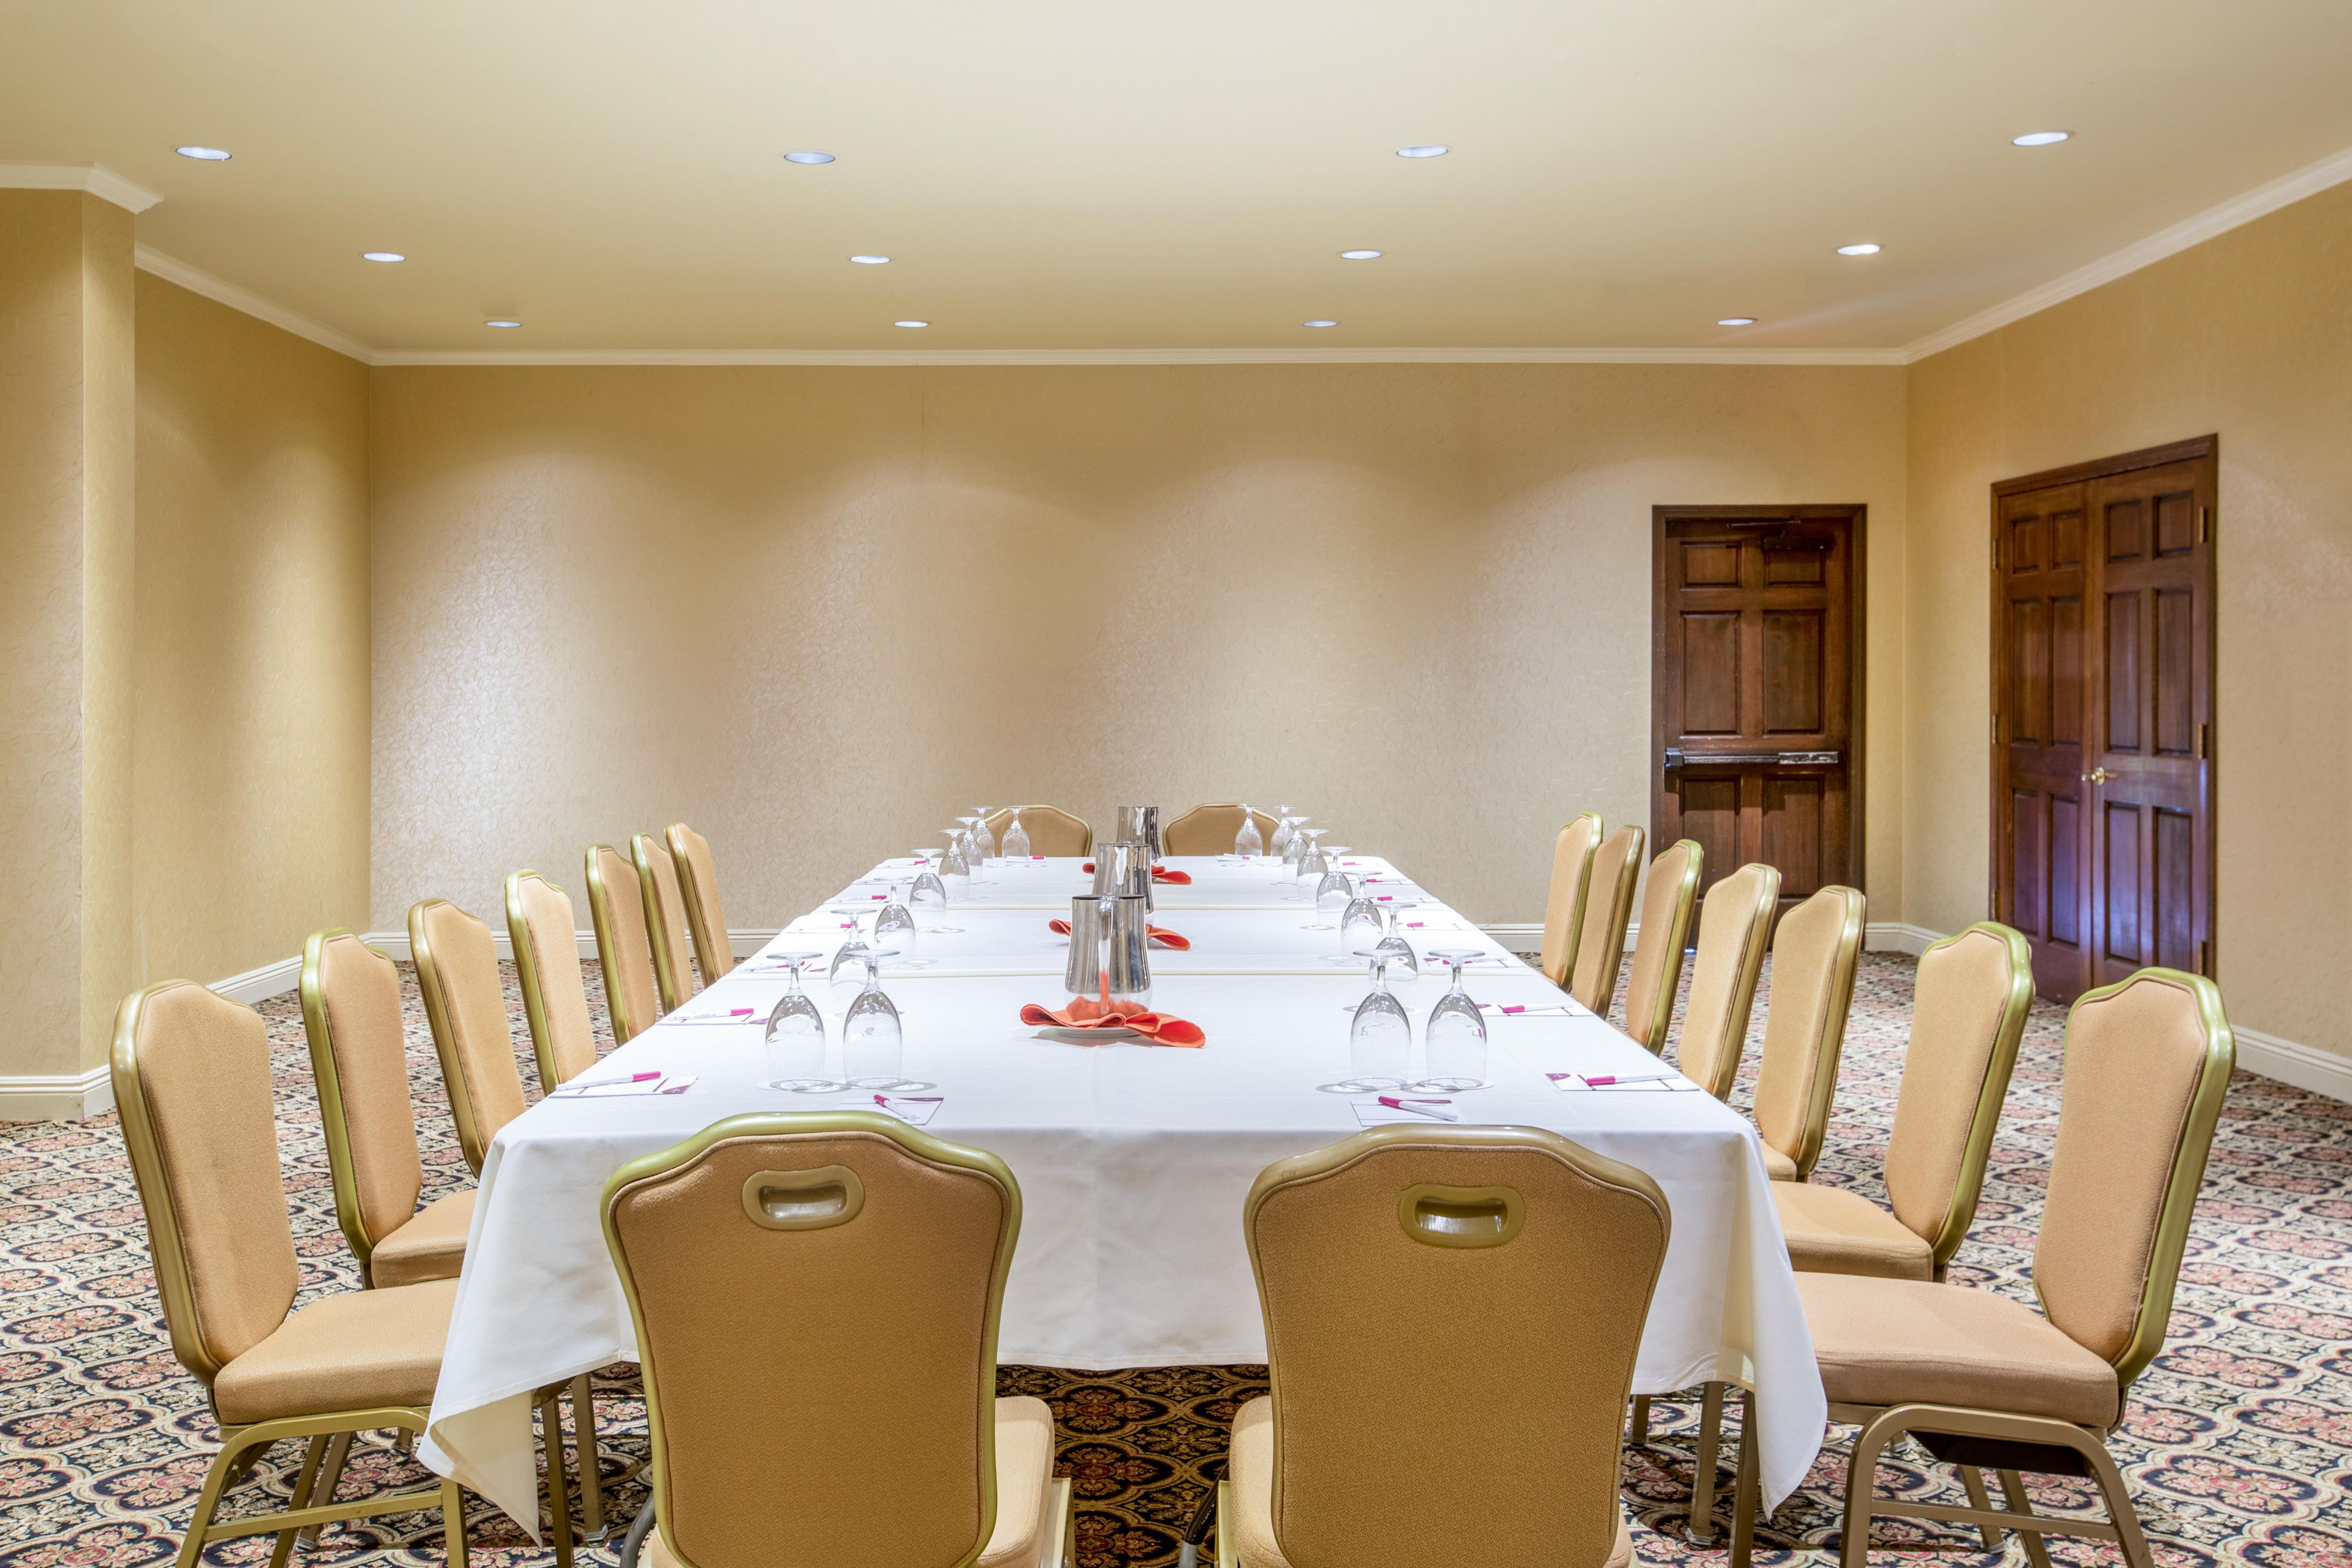 The Cove Room is great for smaller gatherings or breakouts